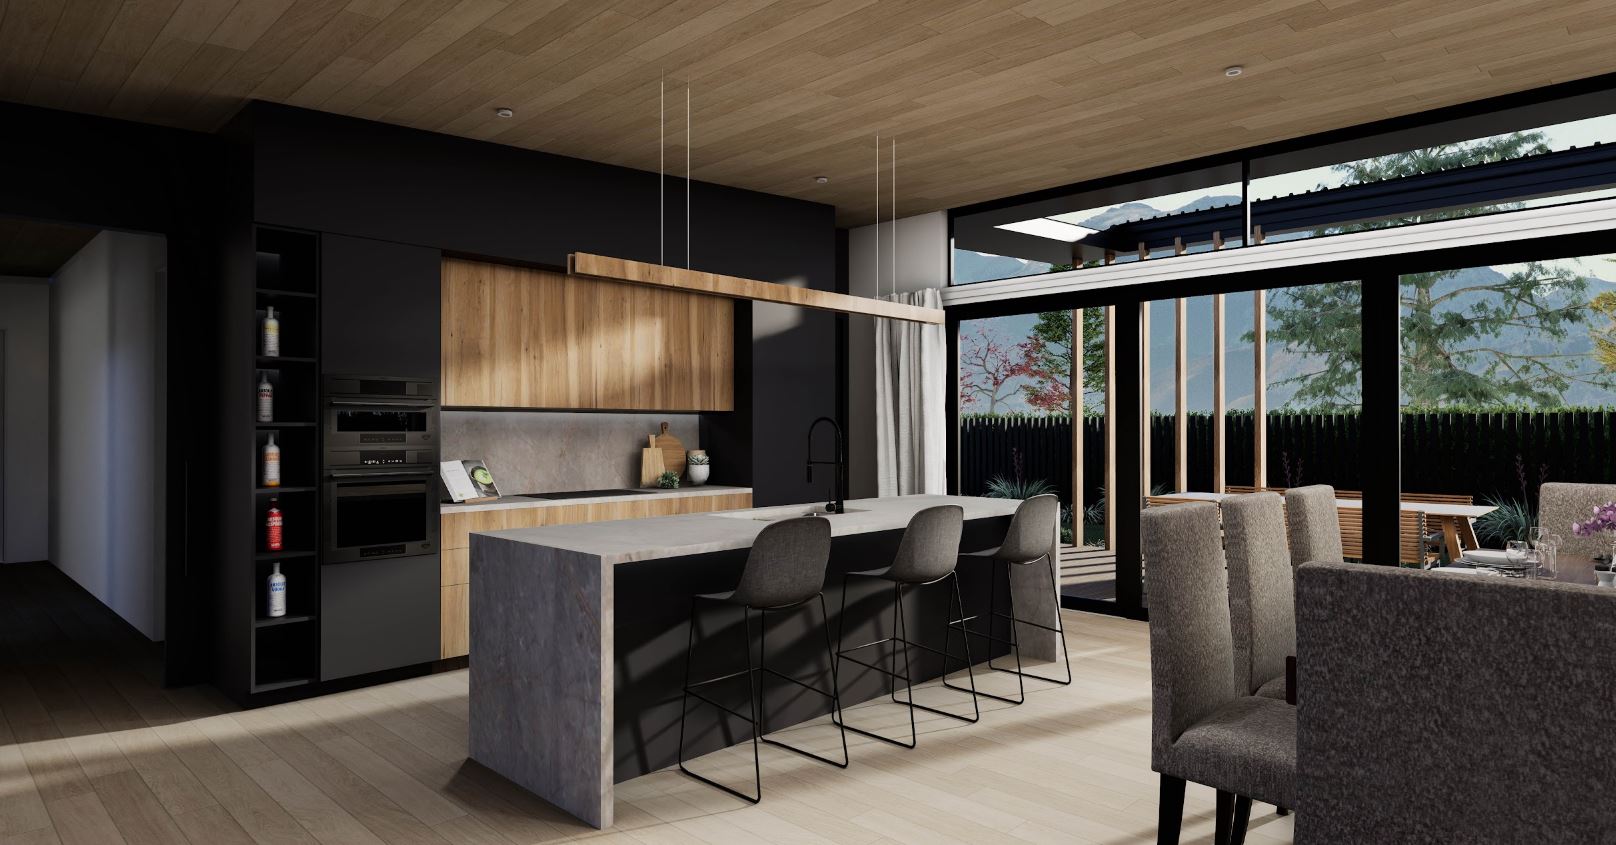 Richmond House Floor Plan Kitchen View by Hallmark Homes Christchurch Canterbury New Zealand. The perfect blend of elegance and functionality with our Richmond design. Indoor and outdoor living spaces with a touch of sophistication.